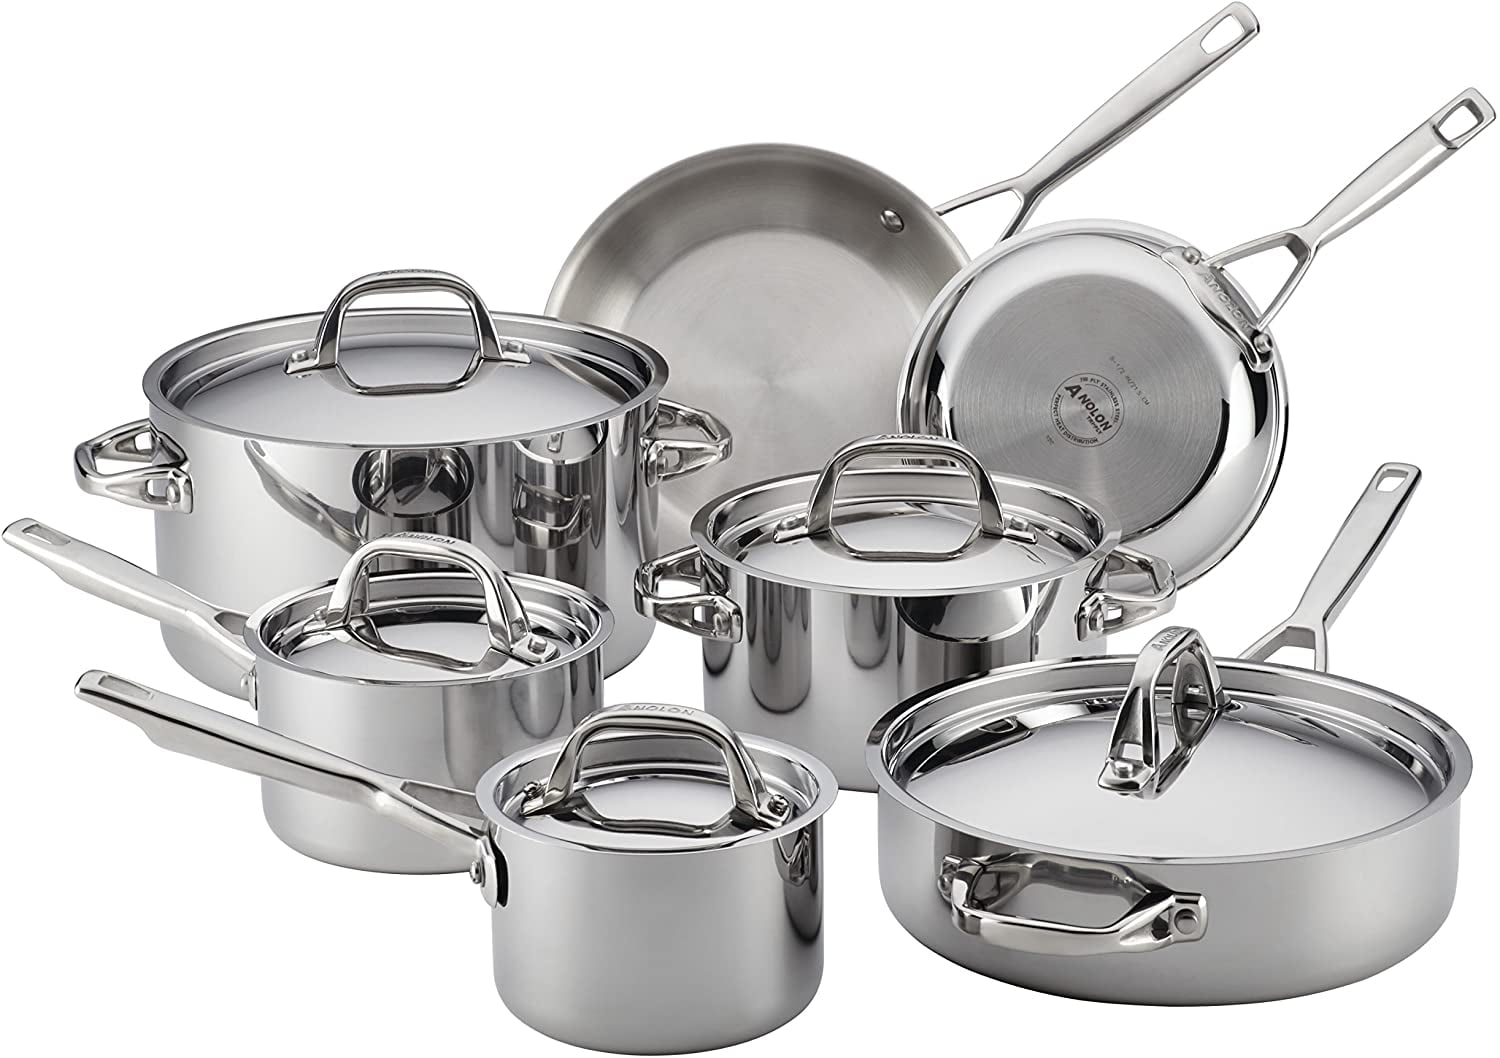 Aluminum Core Stainless Steel Cookware